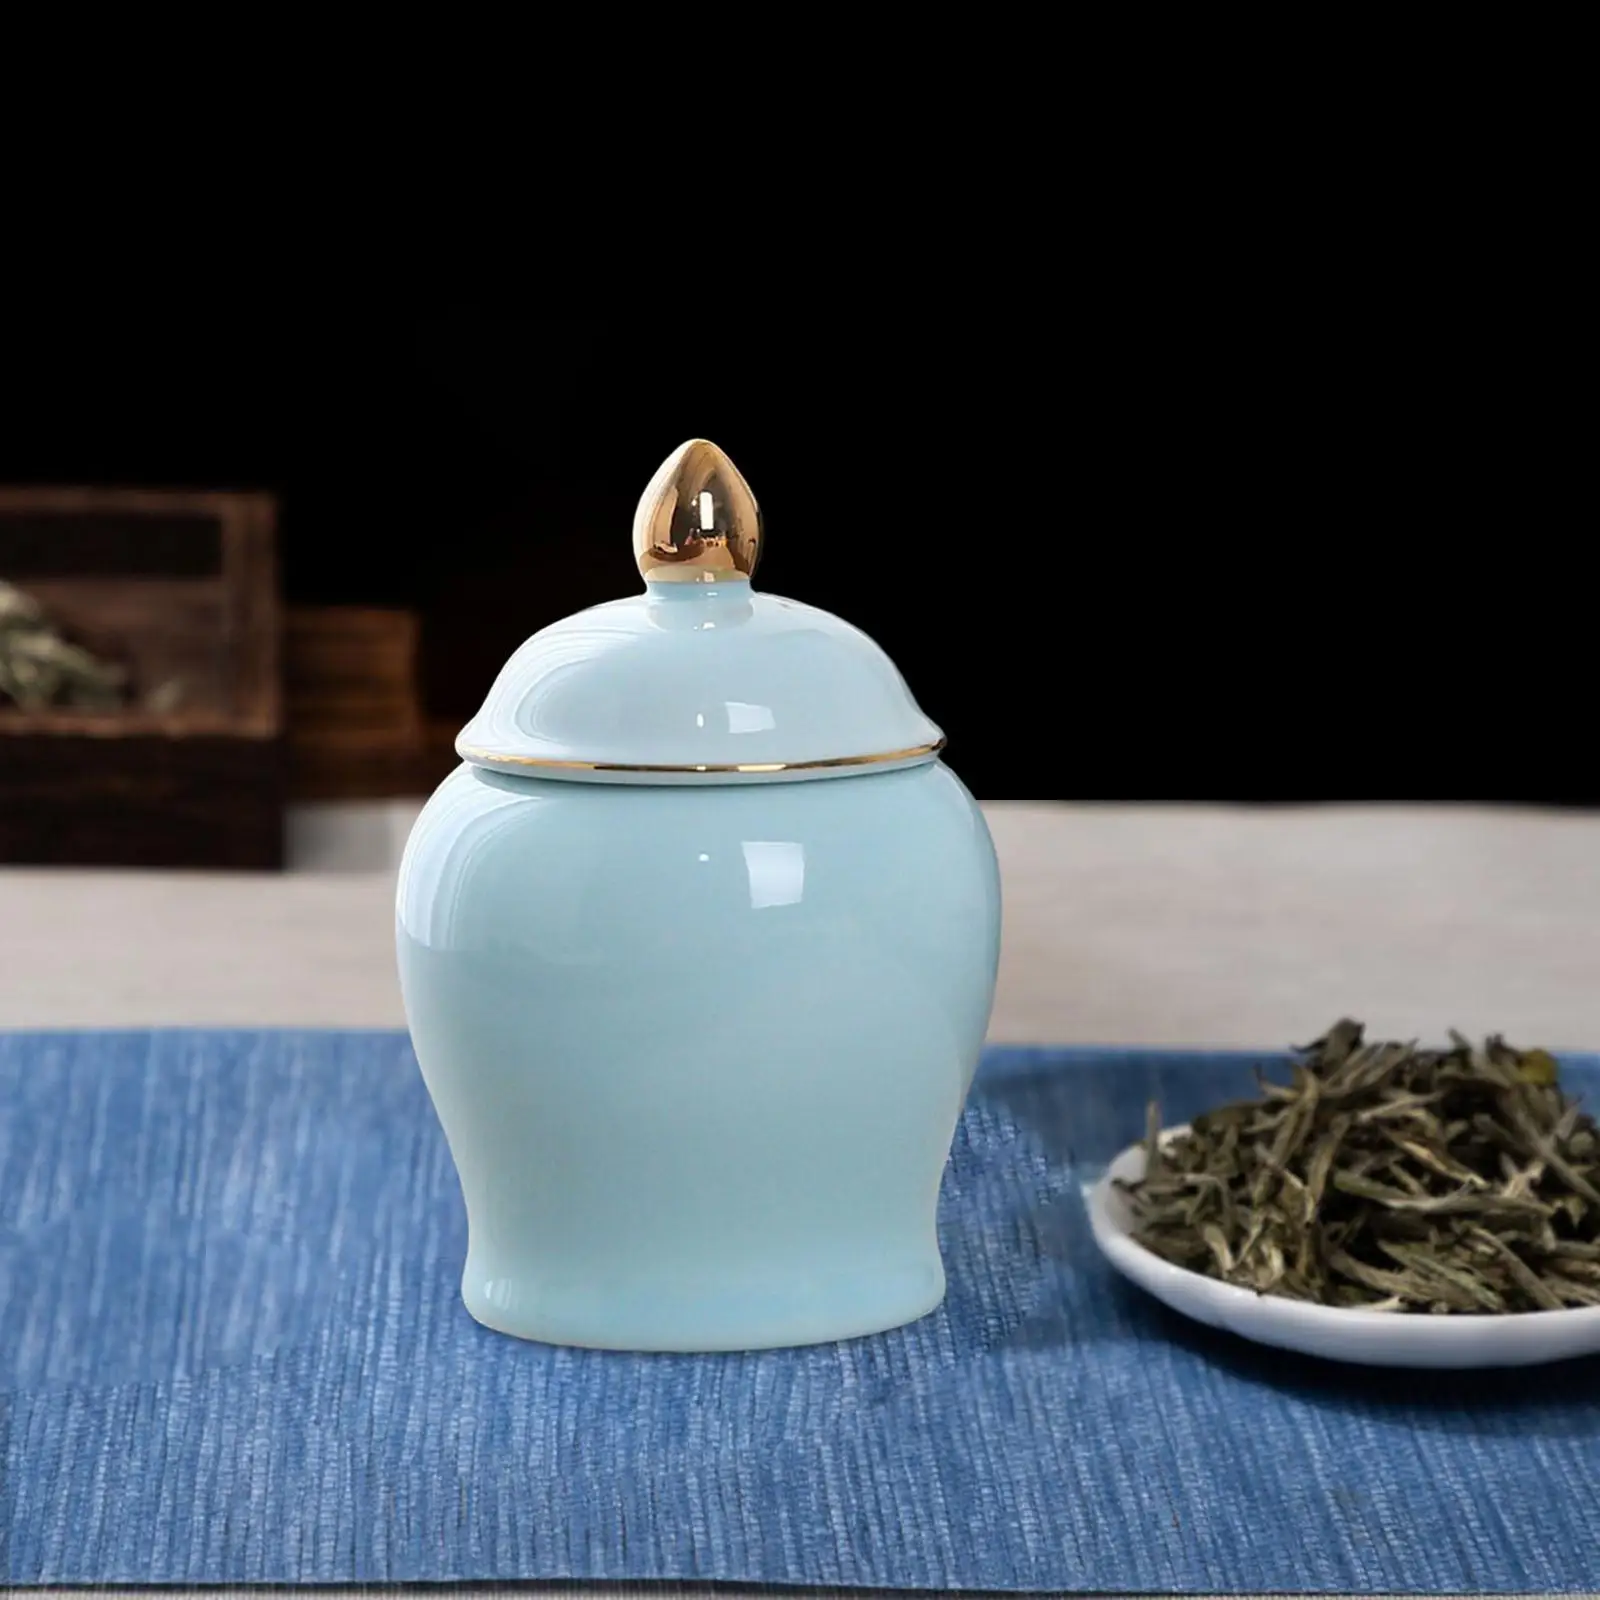 Small Ceramic Storage Jar Polished Tea Canister Decorative Jars Kitchen Canisters for Sugar Coffee Beans Seasoning Salt